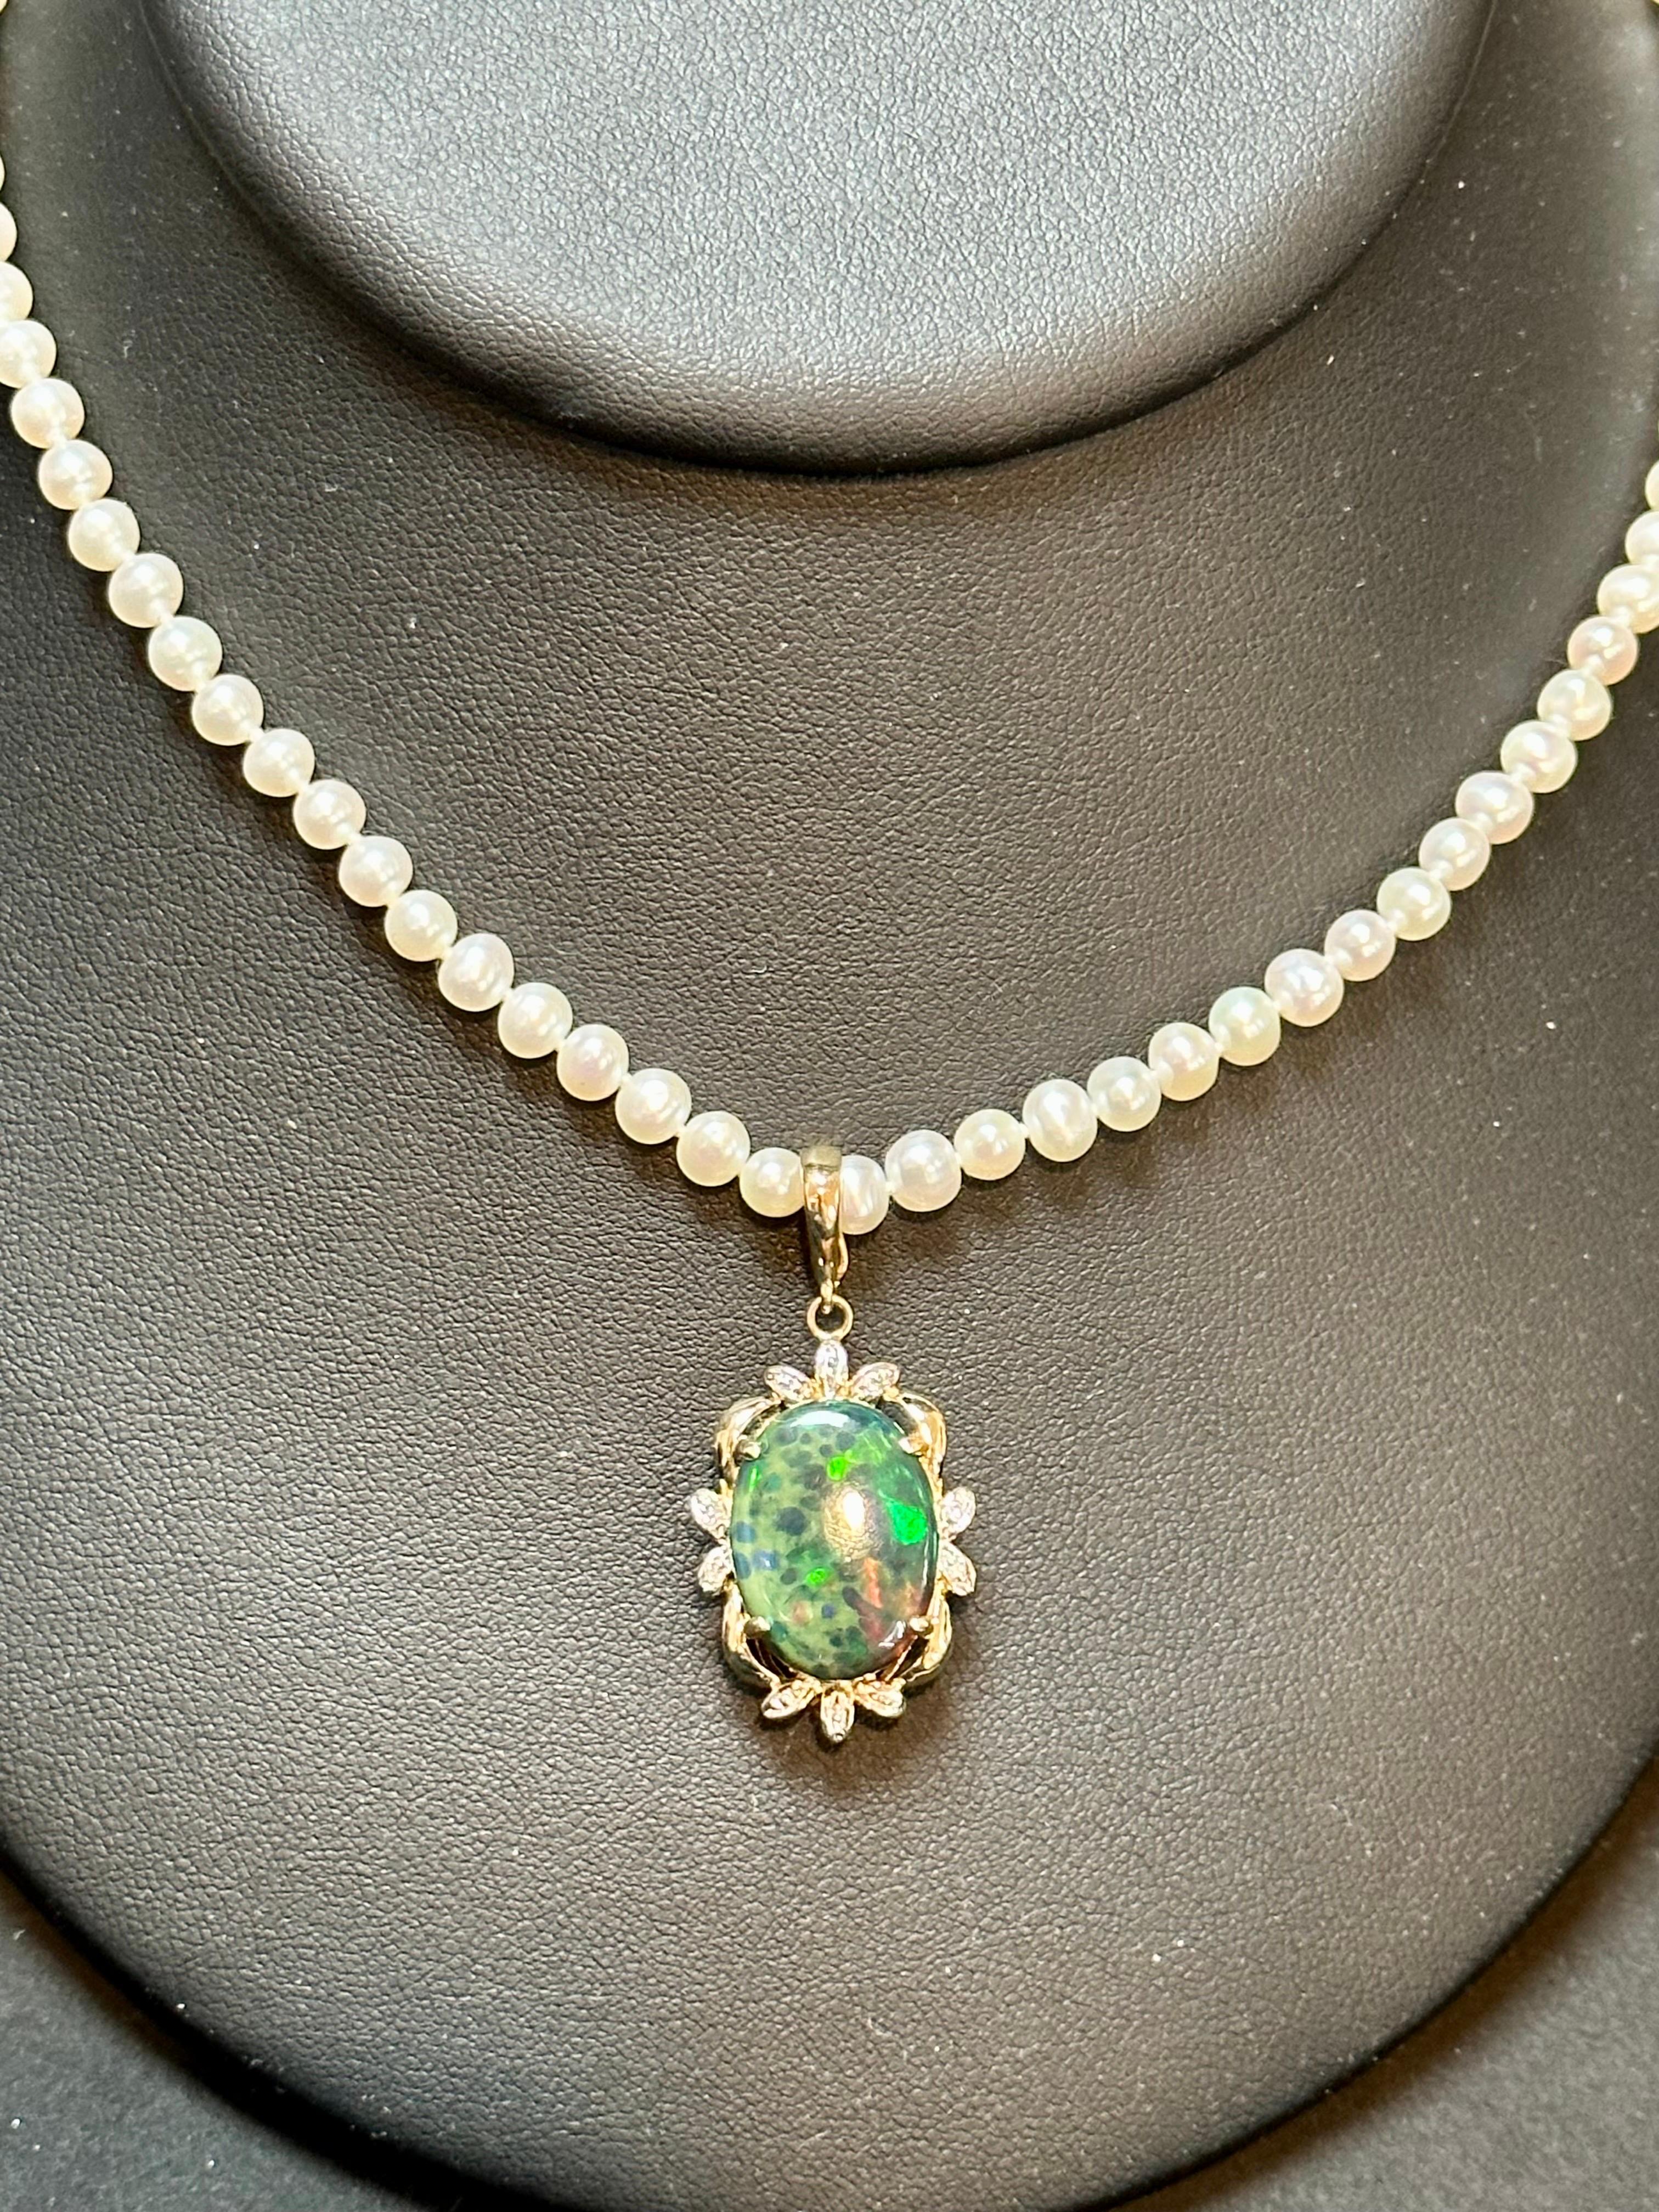 Introducing our exquisite 14K Yellow Gold Pearl Necklace featuring a captivating 4 Carat Oval Black Australian Opal surrounded by dazzling diamonds. The opal displays a mesmerizing play of green, blue, and red hues, emanating a brilliant luster and